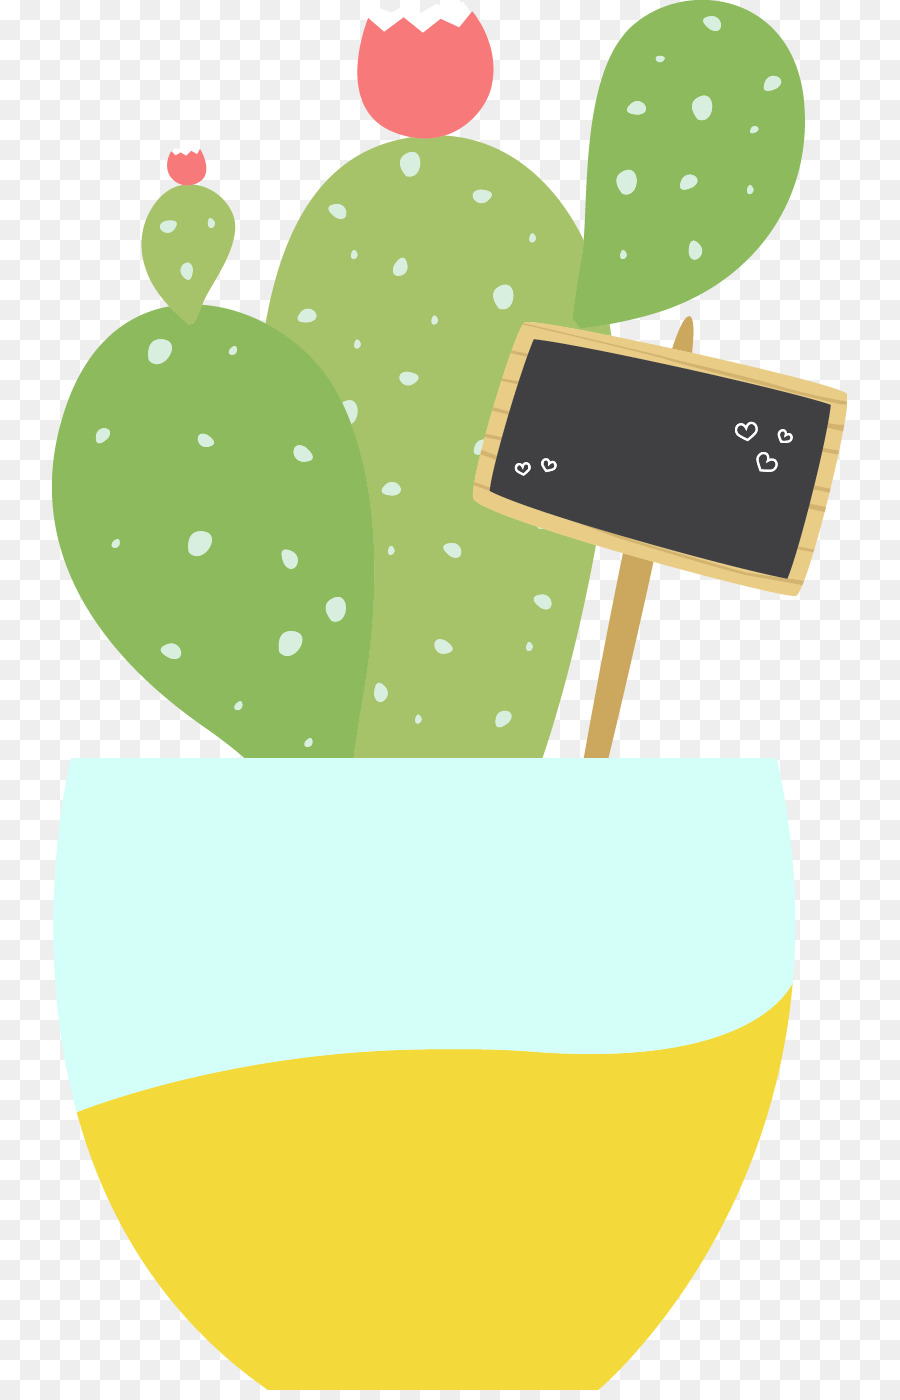 Download Clip art - Potted Cactus Flat